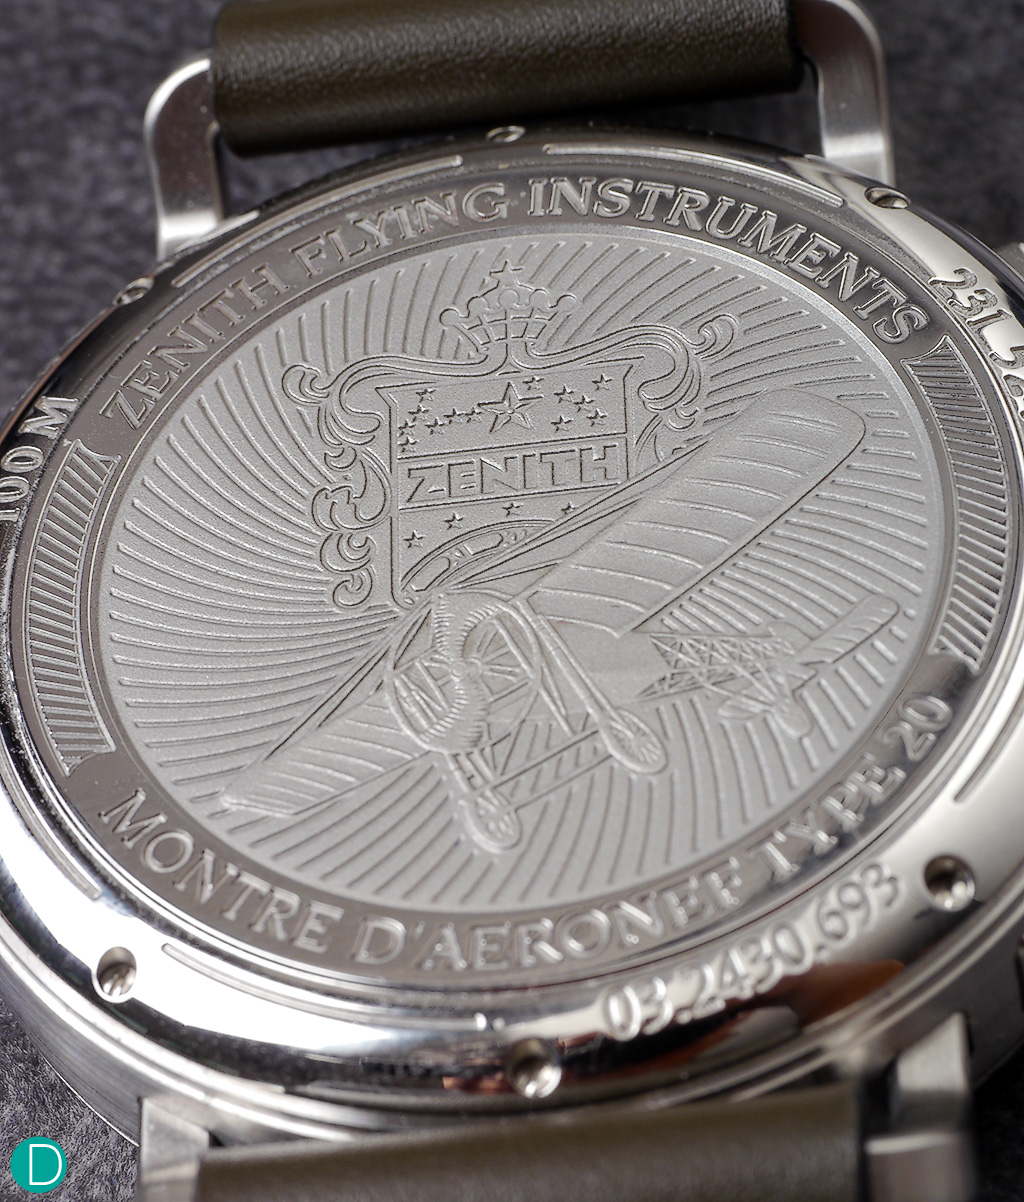 The caseback, with engraving. 